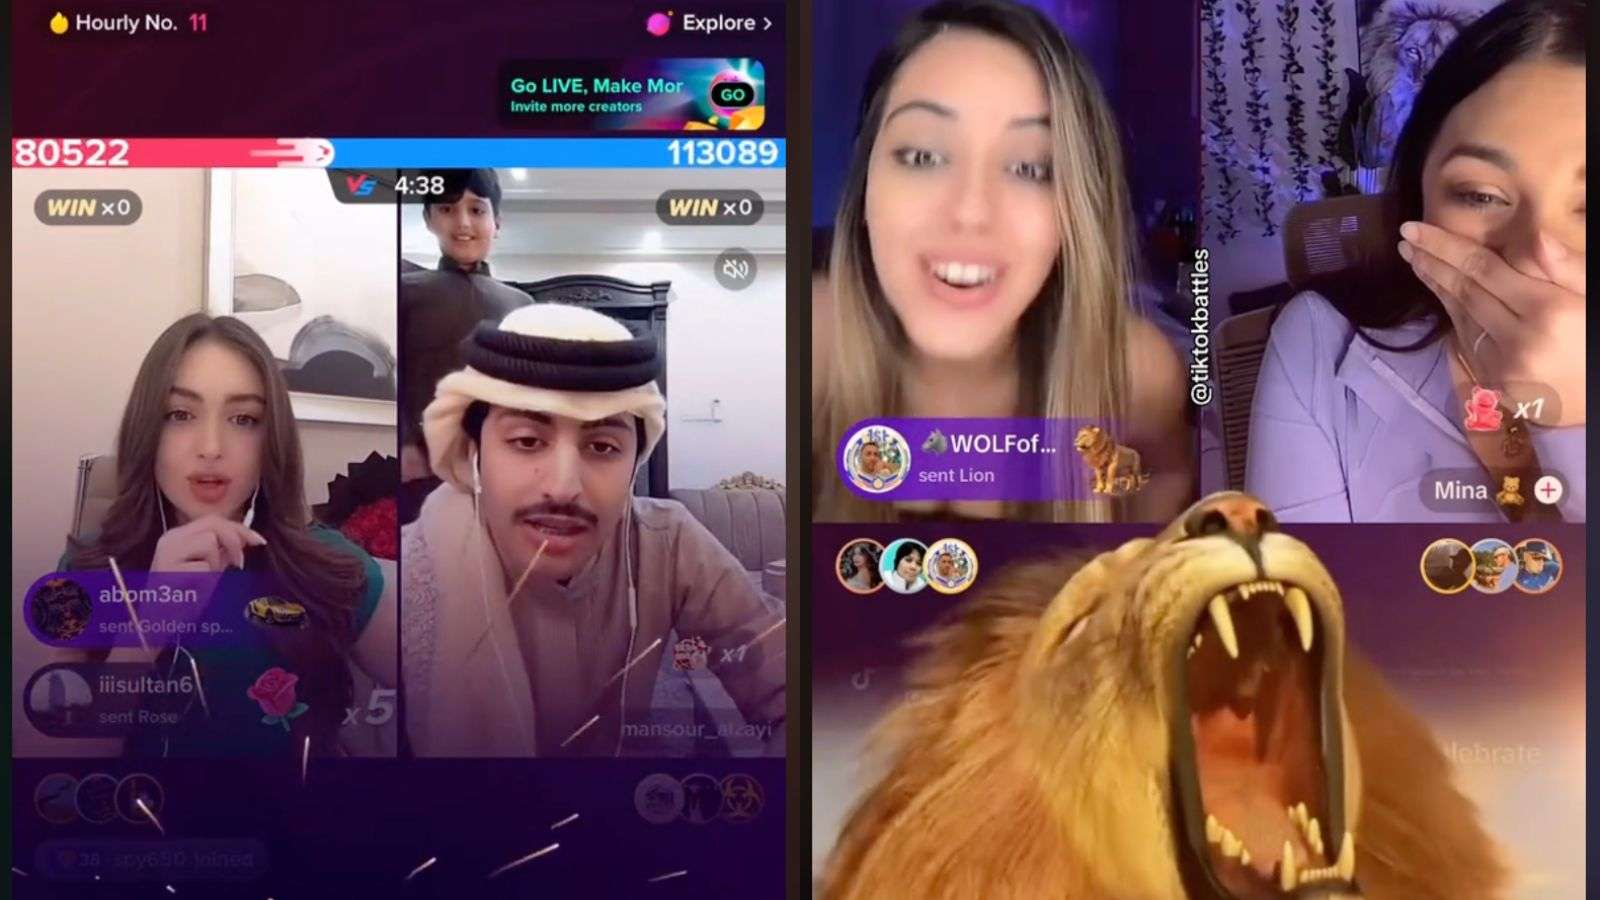 TikTok users are freaking out over live battles